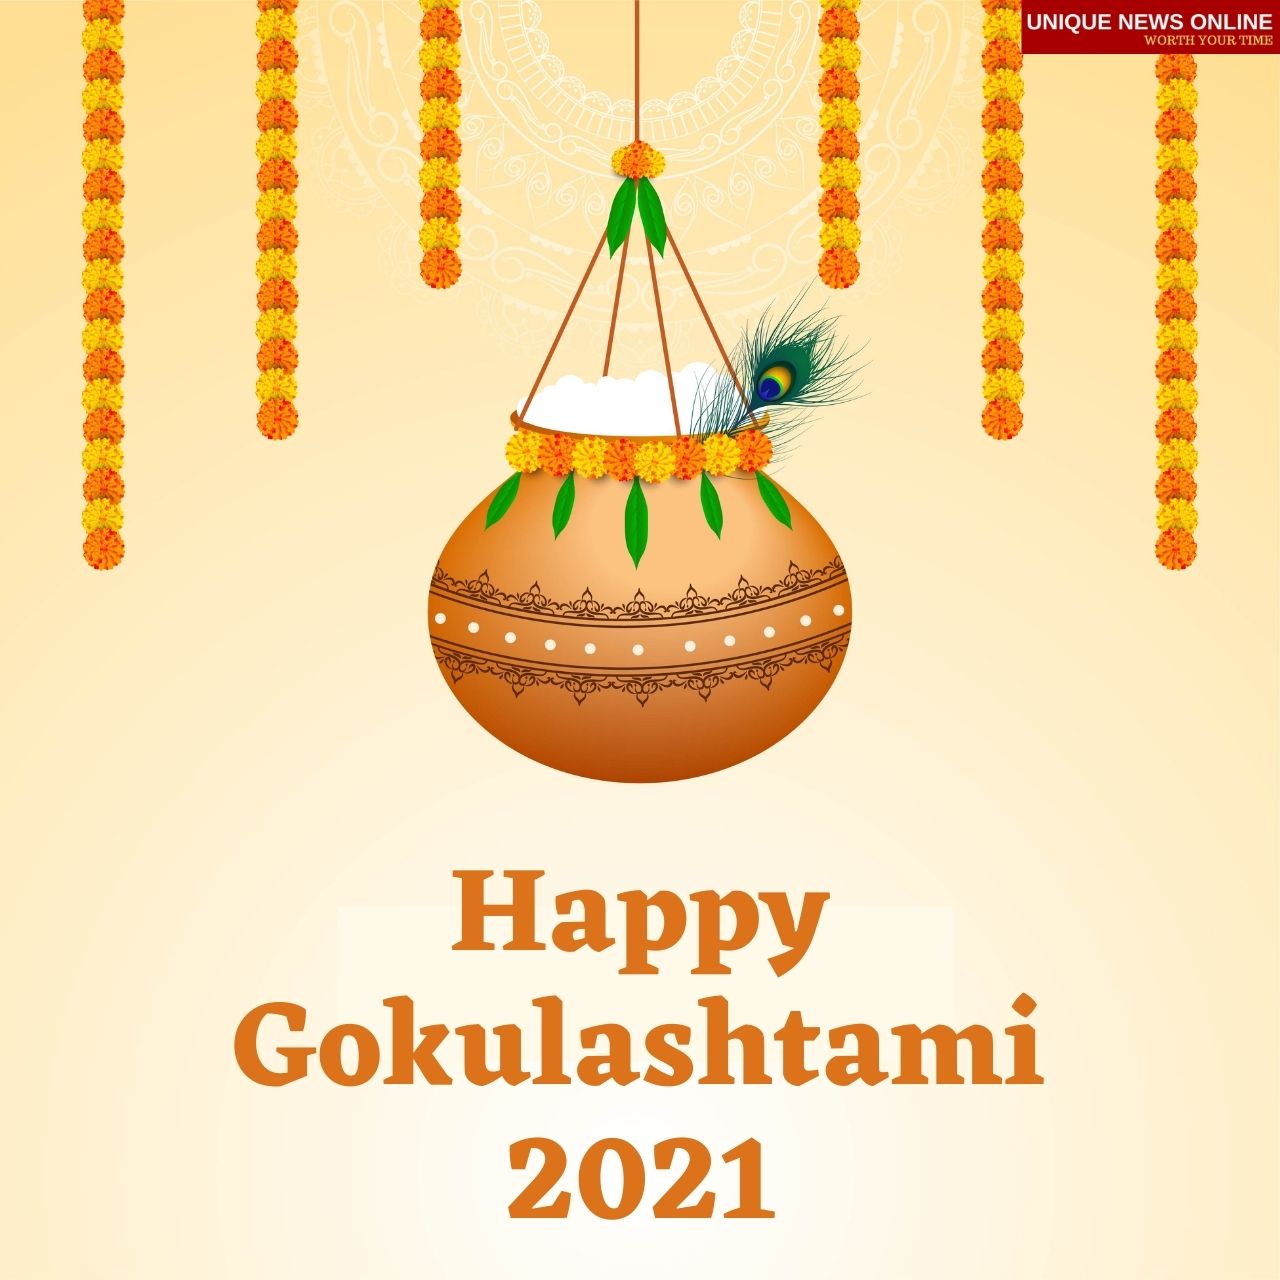 Happy Gokulashtami 2021 Wishes, HD Images, Messages, Quotes, WhatsApp SMS, and Facebook Status